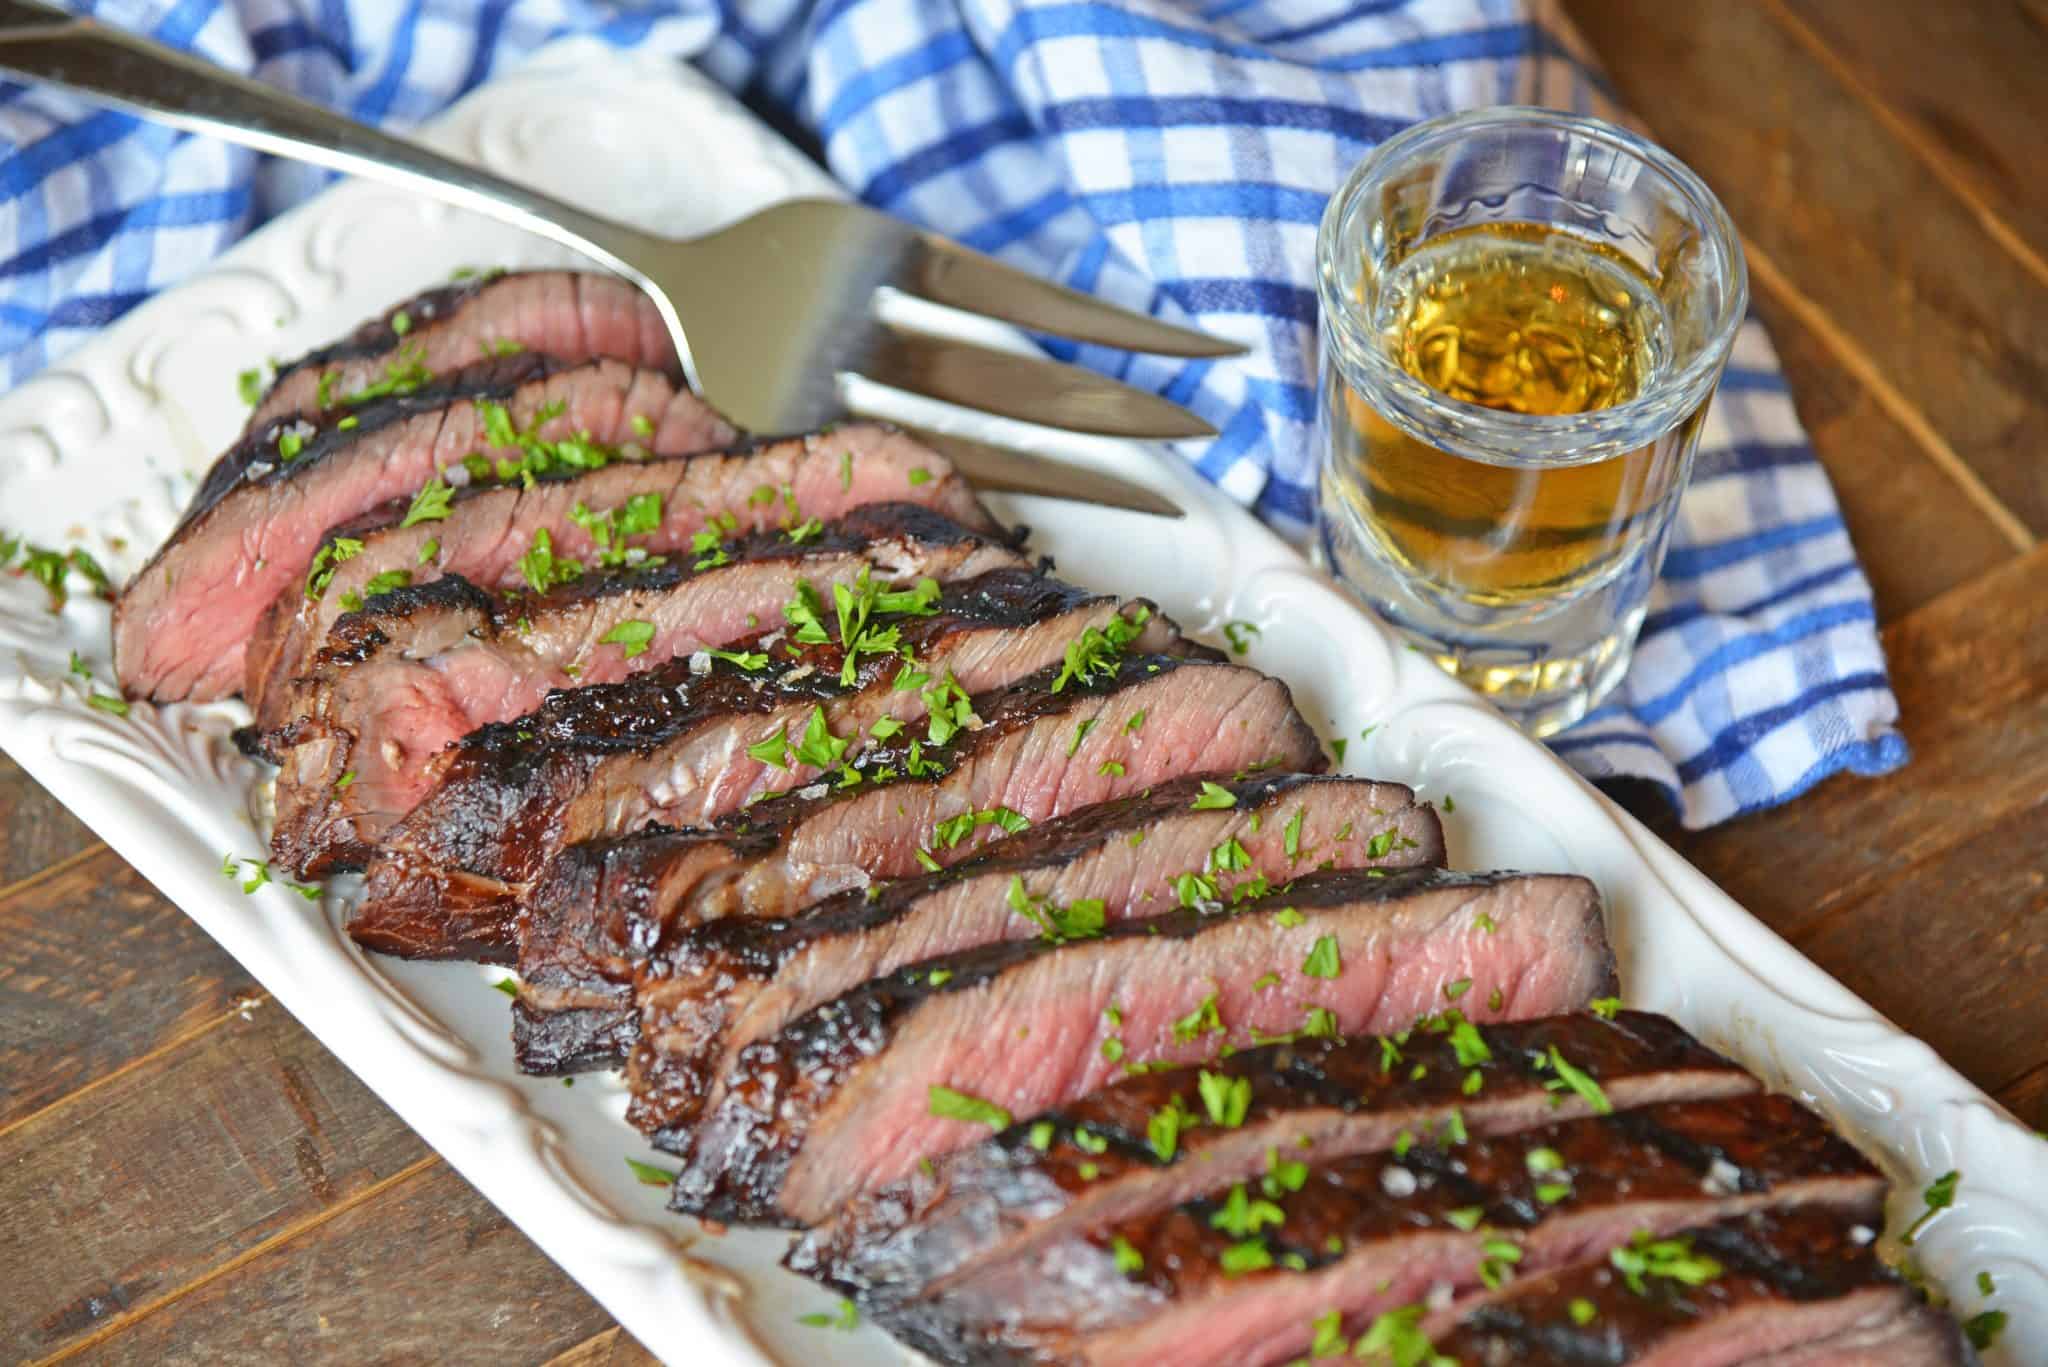 In just under 30 minutes, this tender and juicy Balsamic Whiskey Sirloin is grilled and ready to eat. What could be better? 